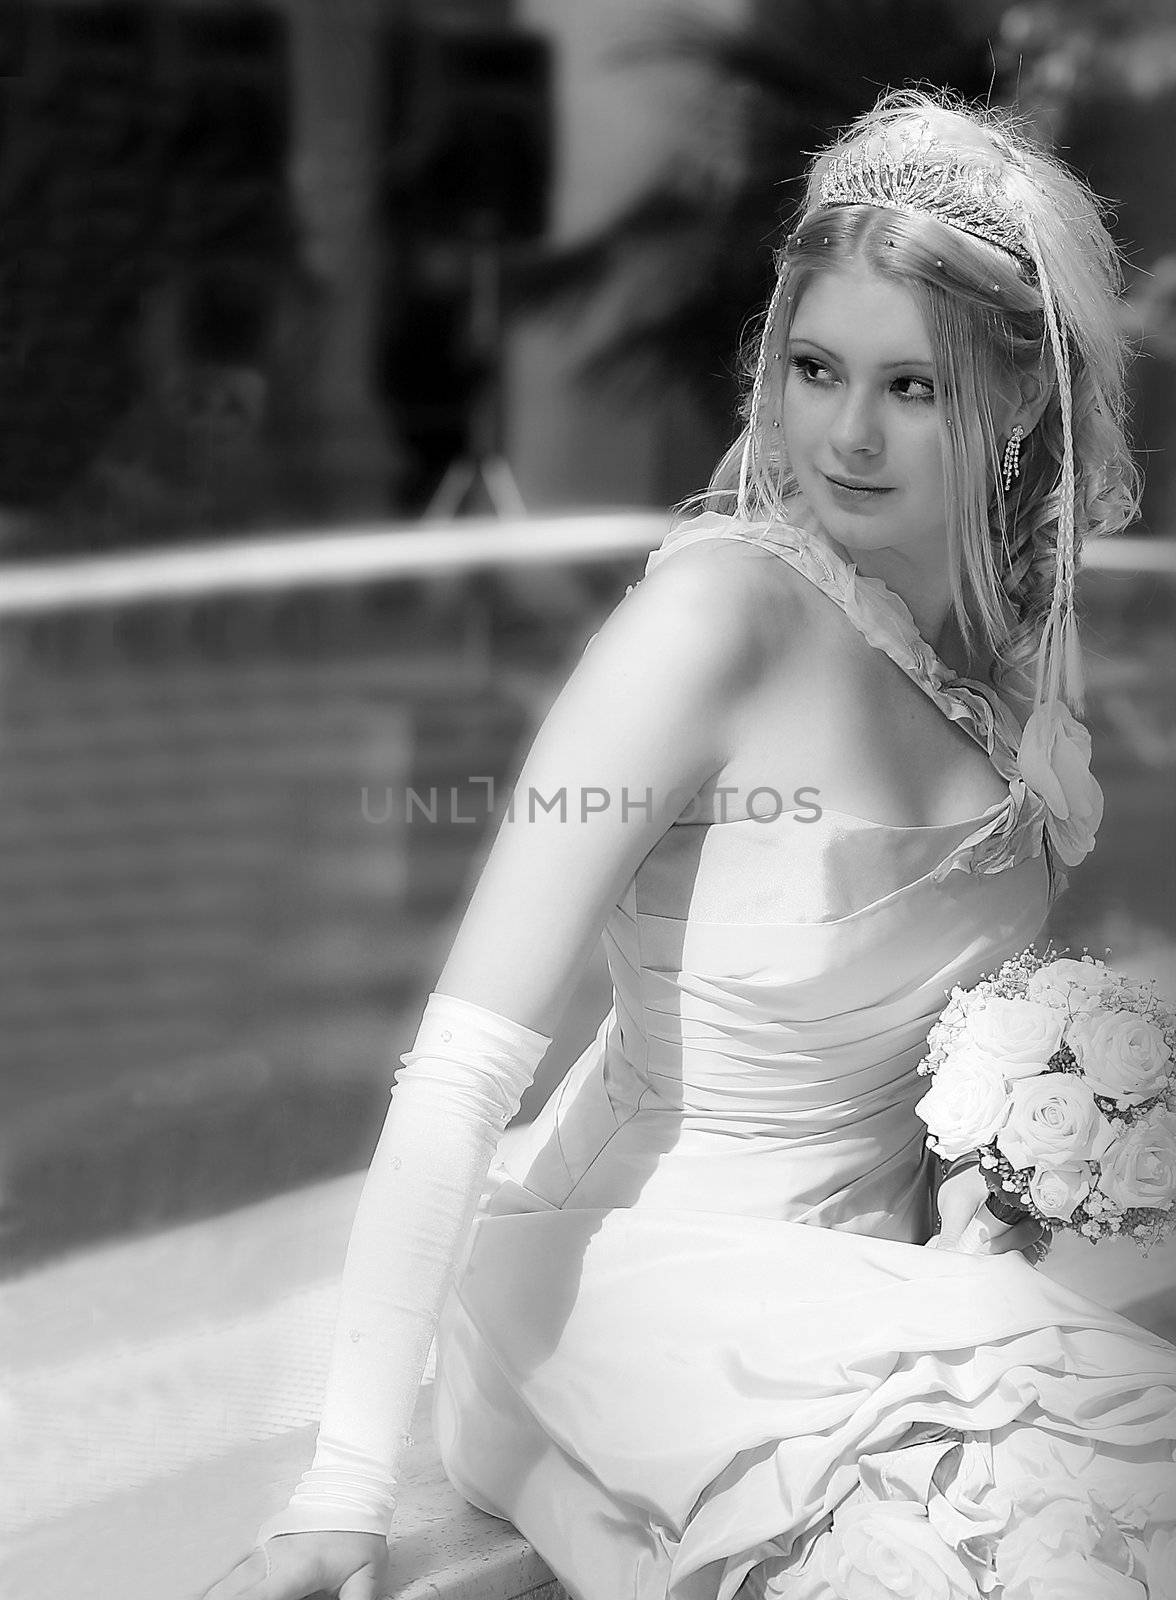 Pretty young blond bride by speedfighter